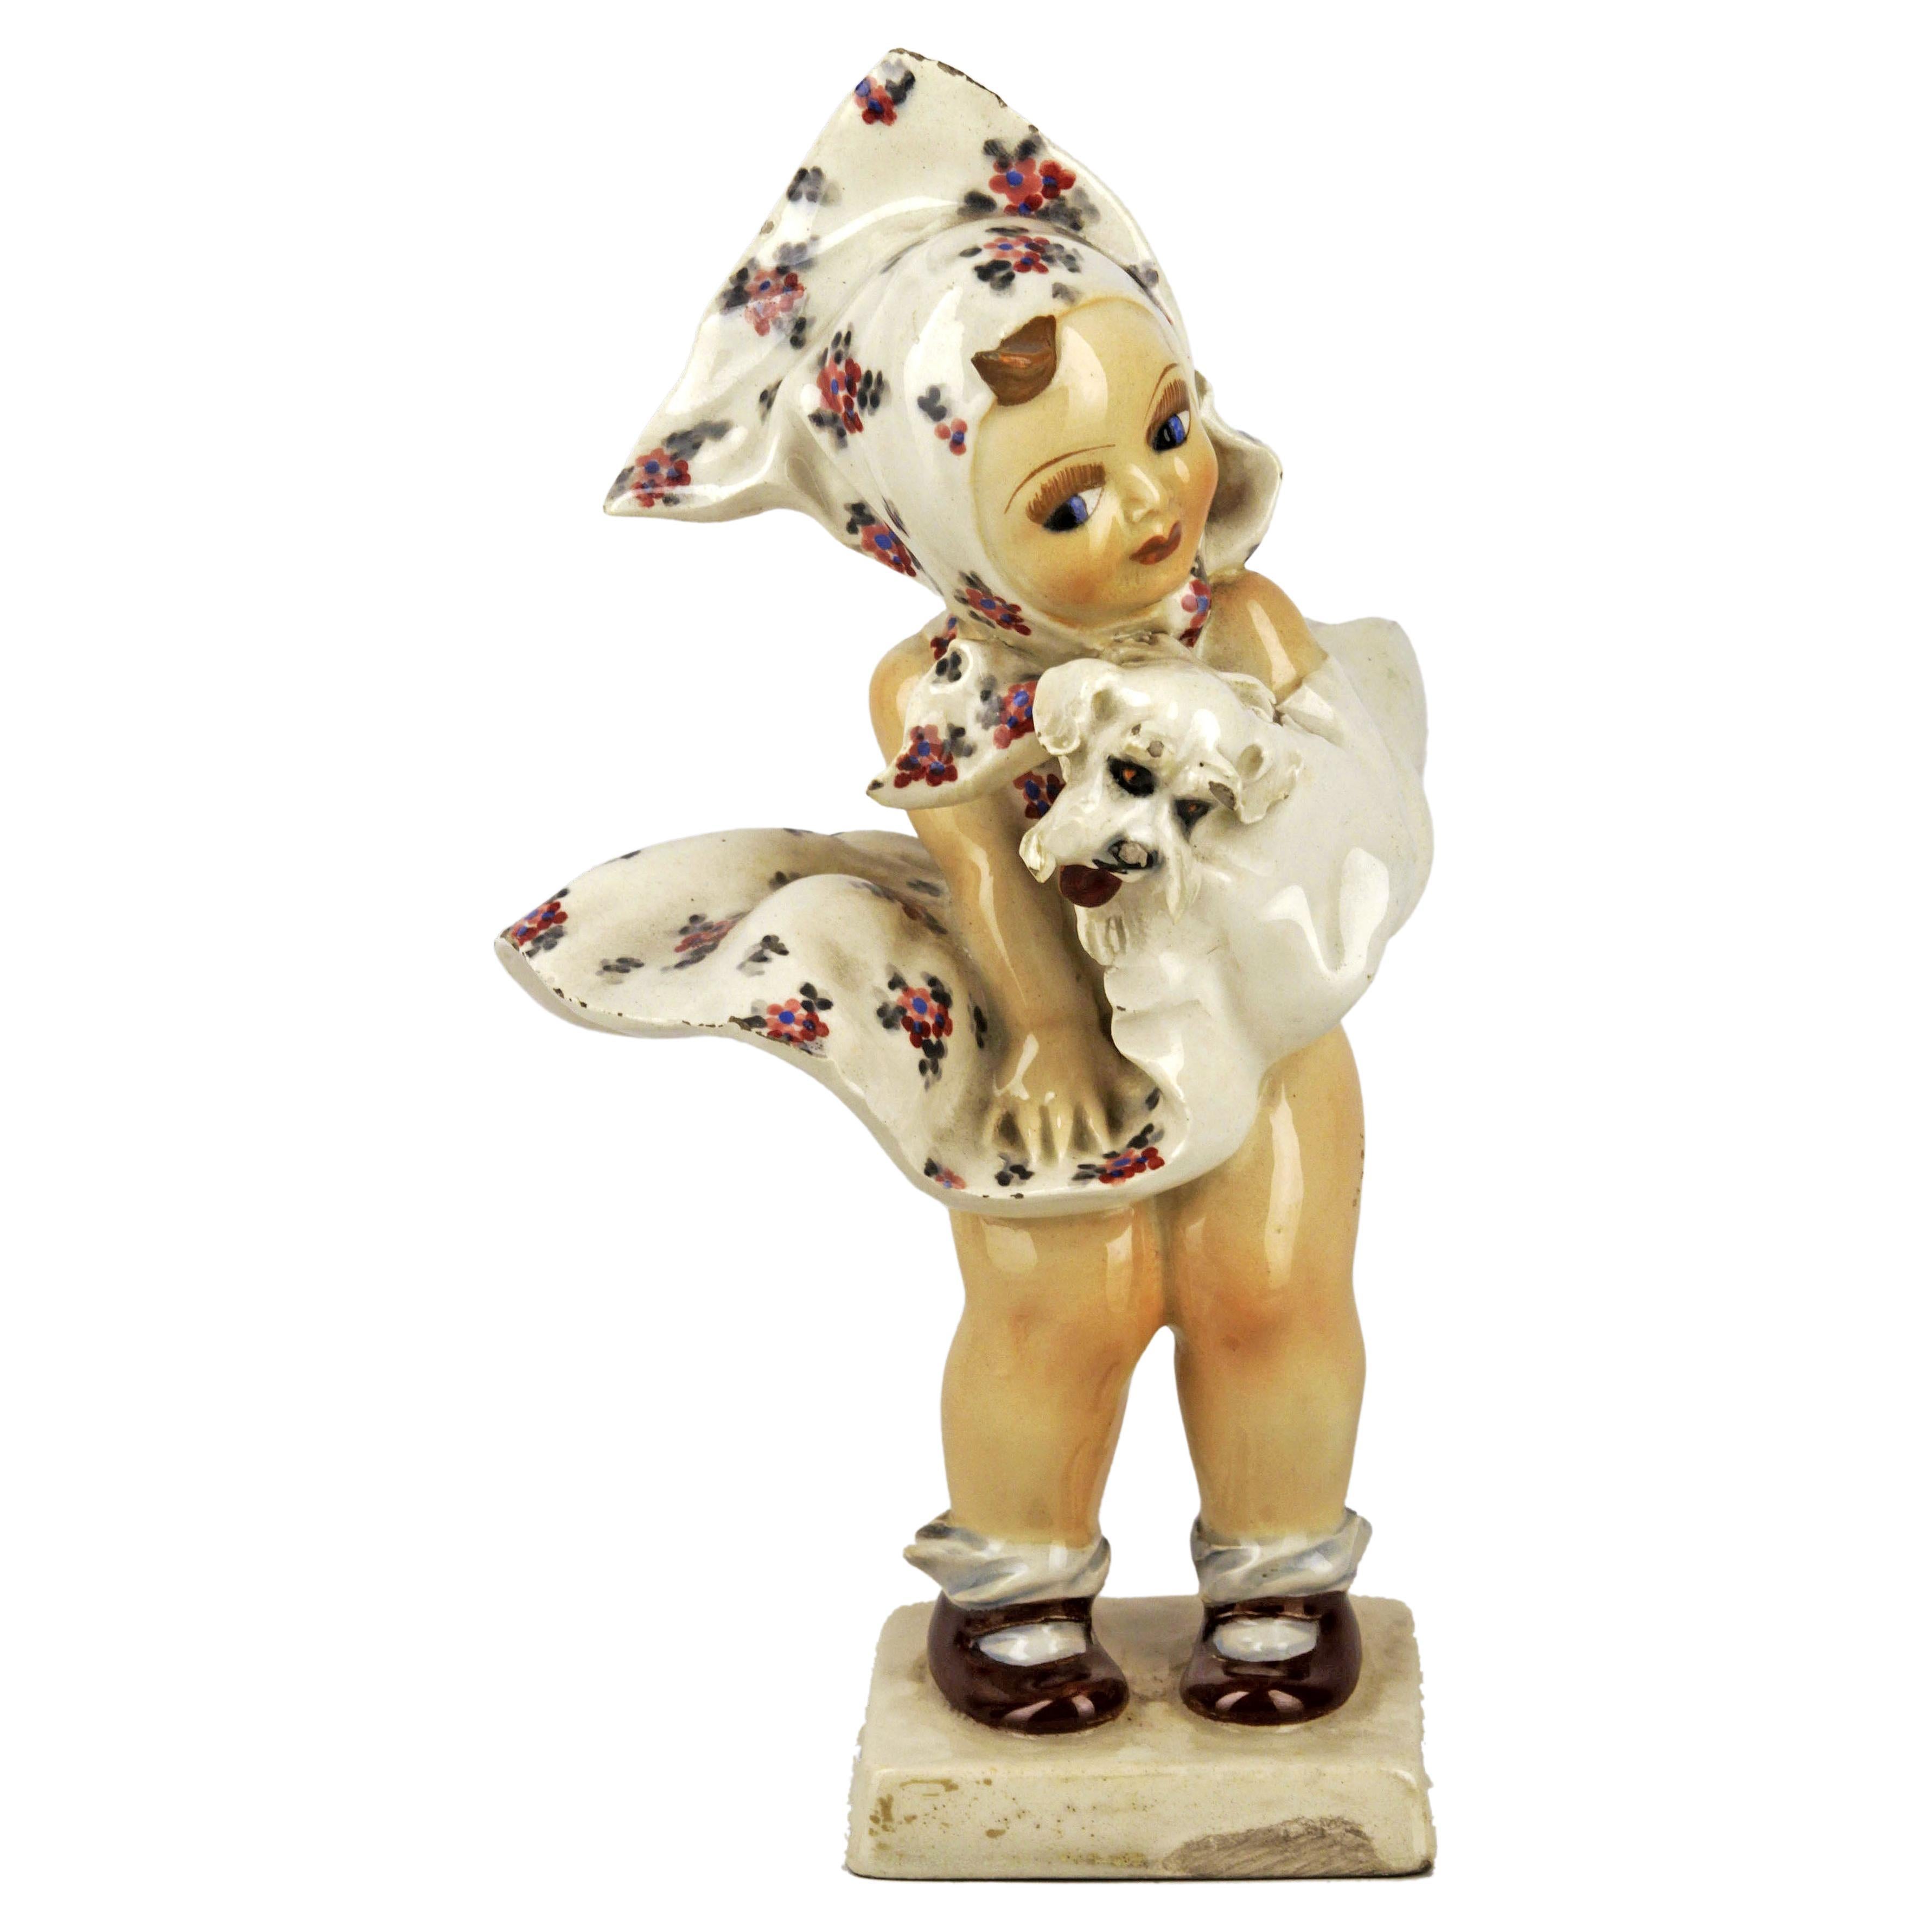 1950s Torino Hand-Painted Glazed Ceramic Sculpture of Girl and Dog by C. Mollica For Sale